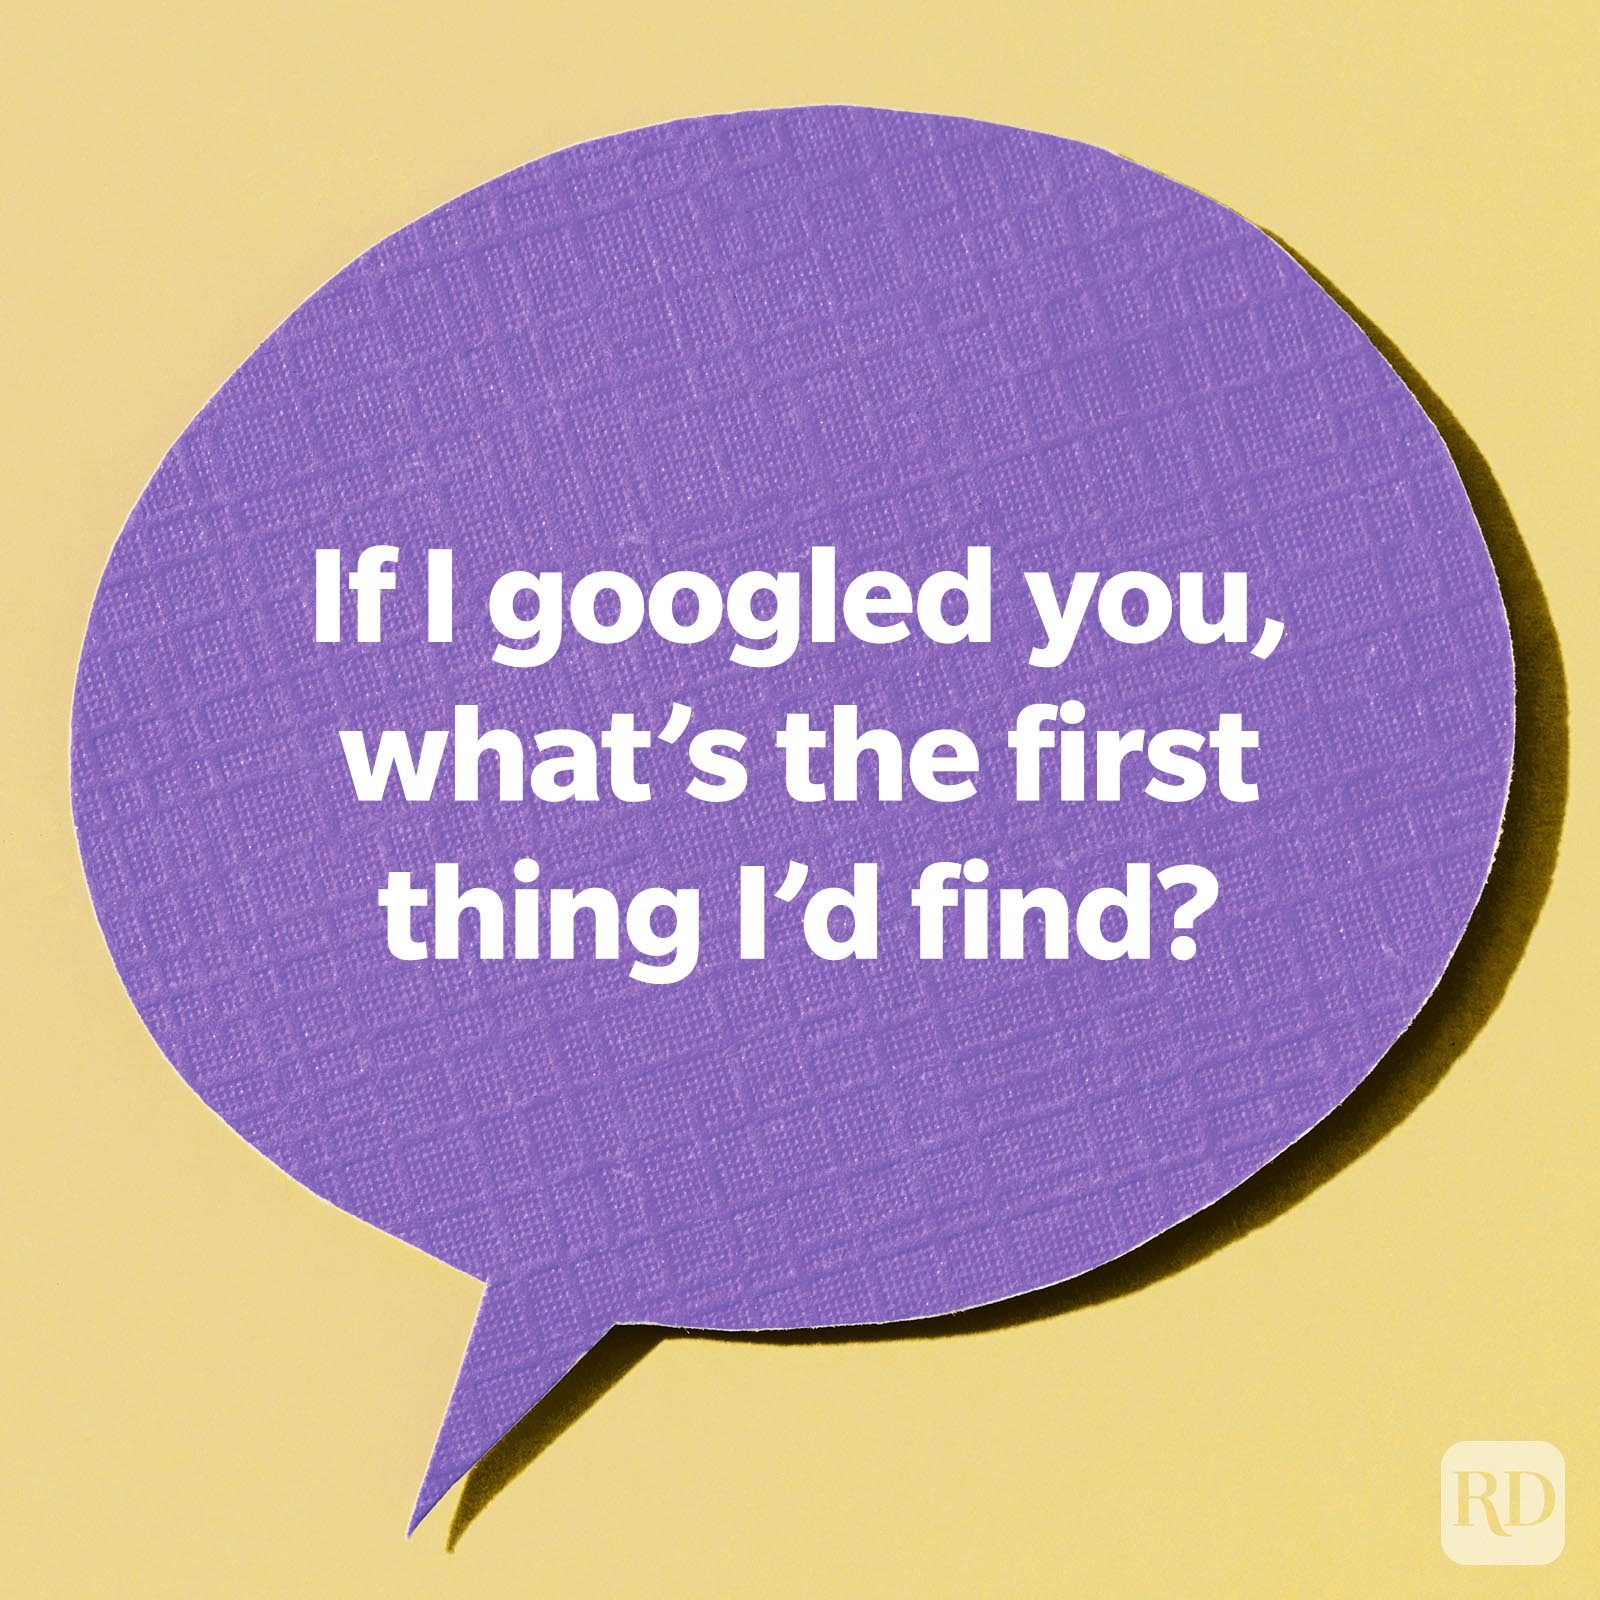 If I googled you, what's the first thing I'd find?